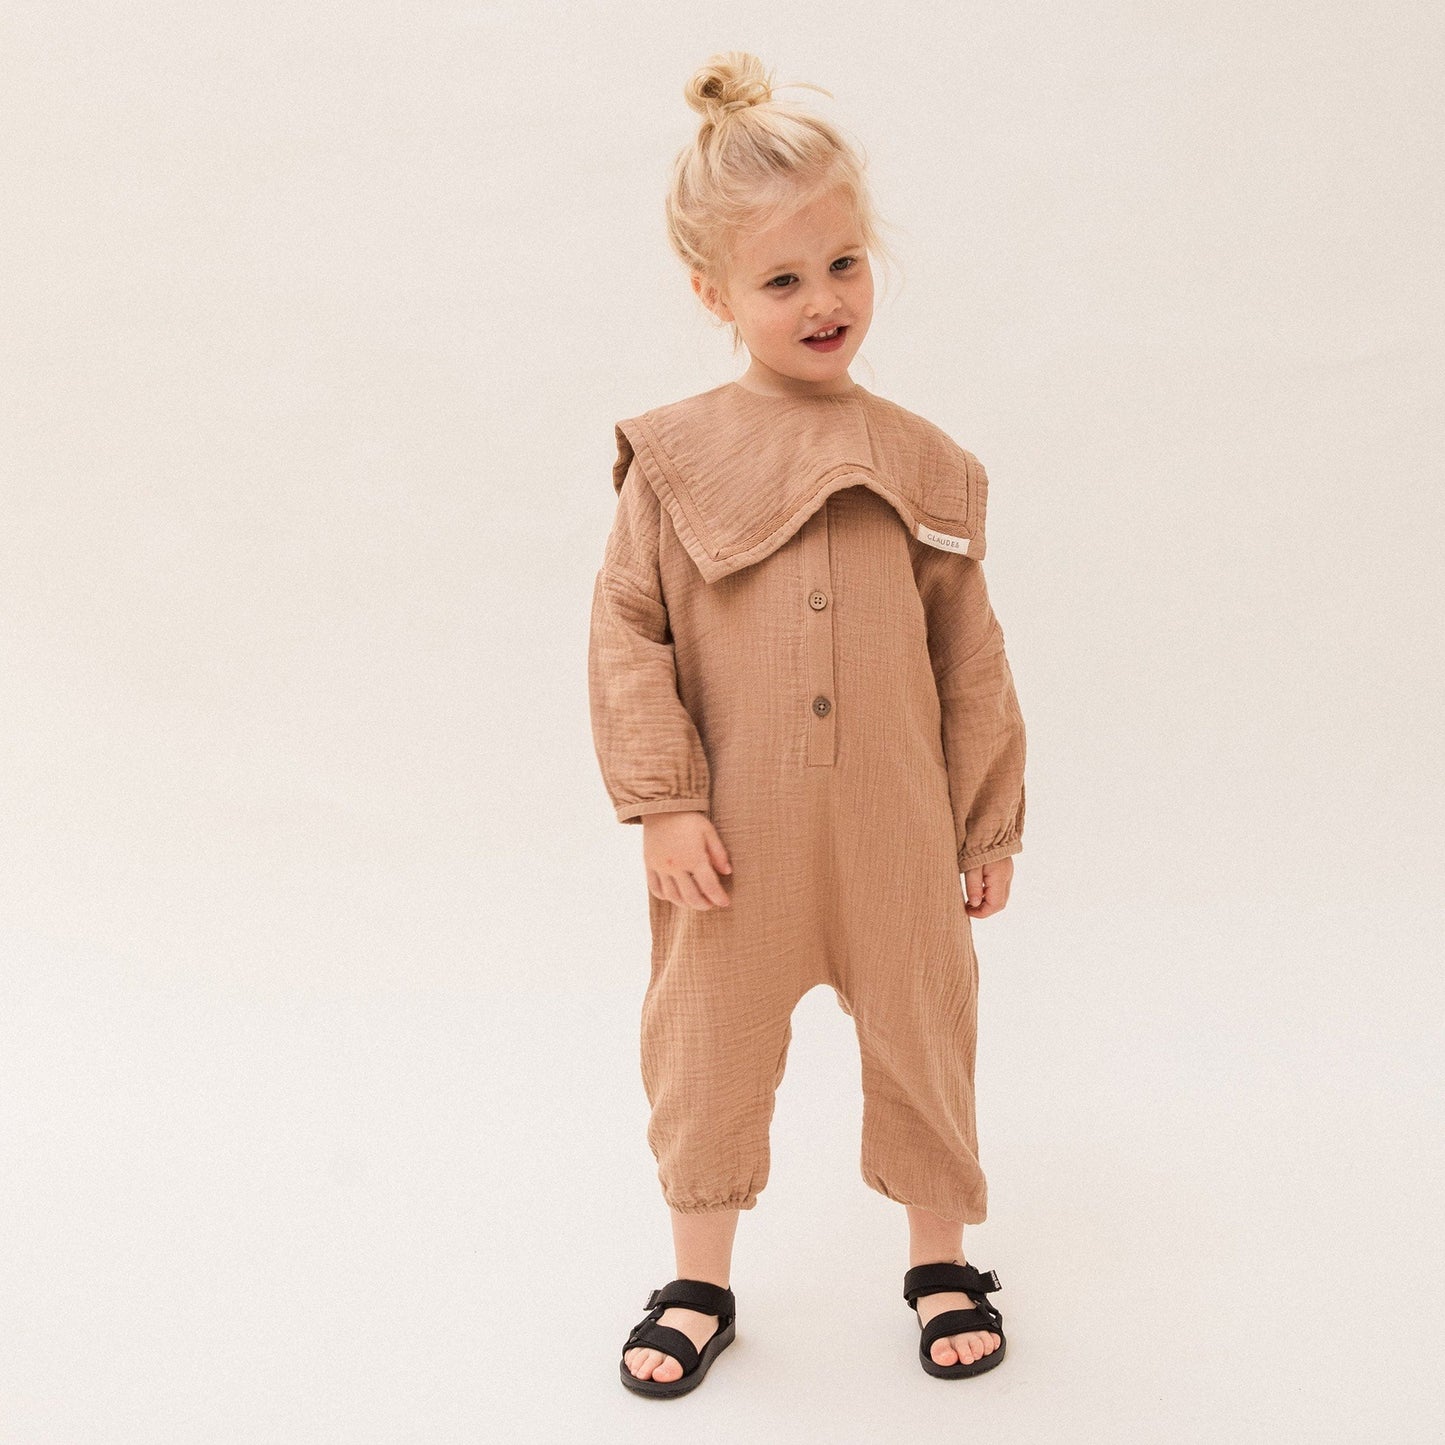 The brand new Claude & Co Gauze Jumpsuit and collar in Fawn is available from Nottinghamshire Stockist Alf & Co 